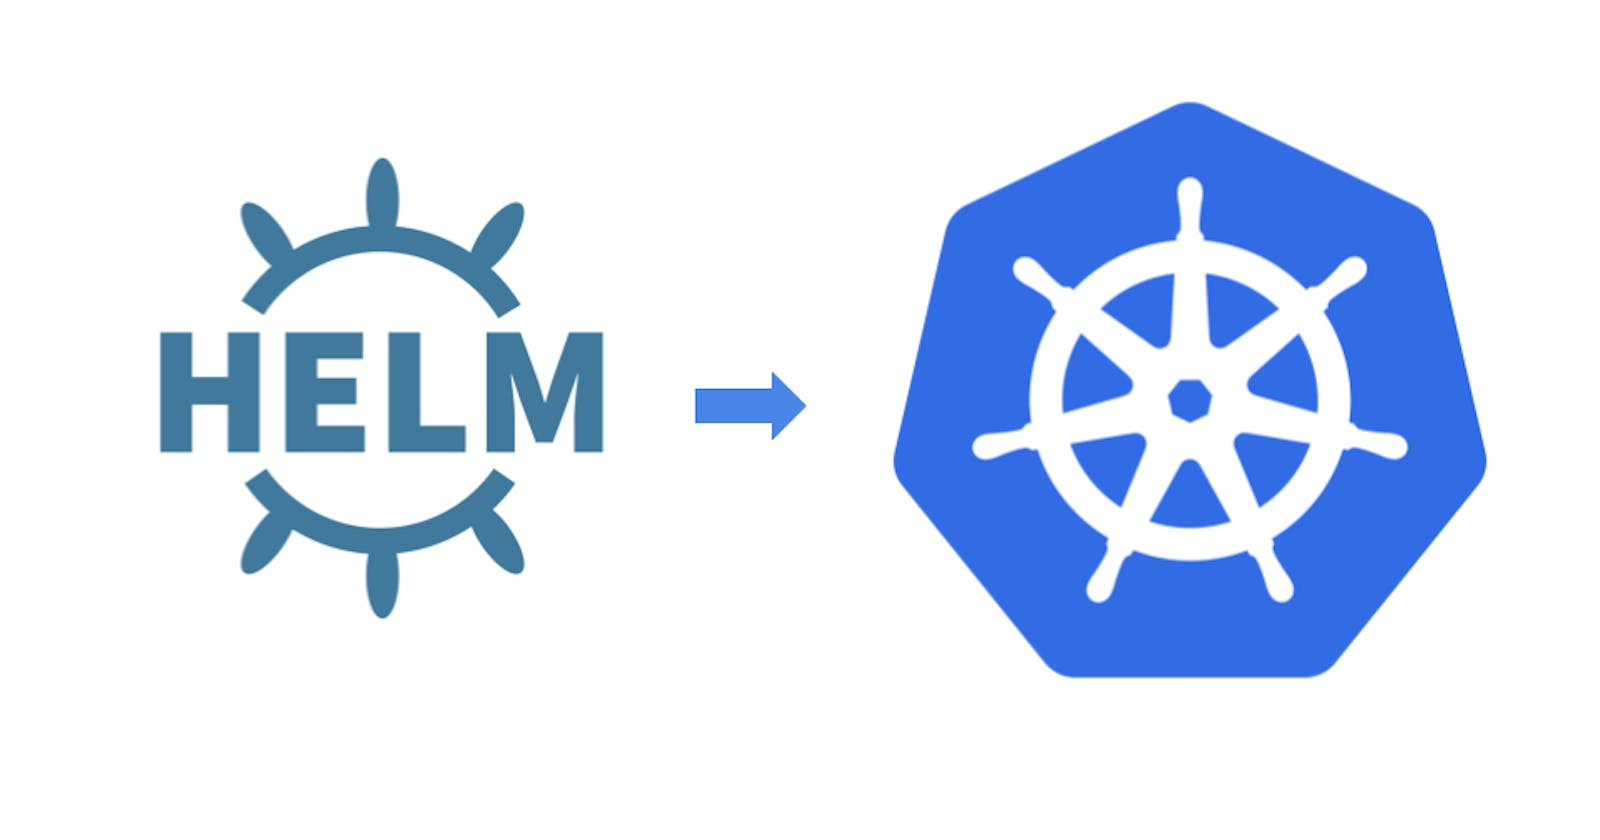 How to Install Helm Charts in Kubernetes: A Step-by-Step Guide